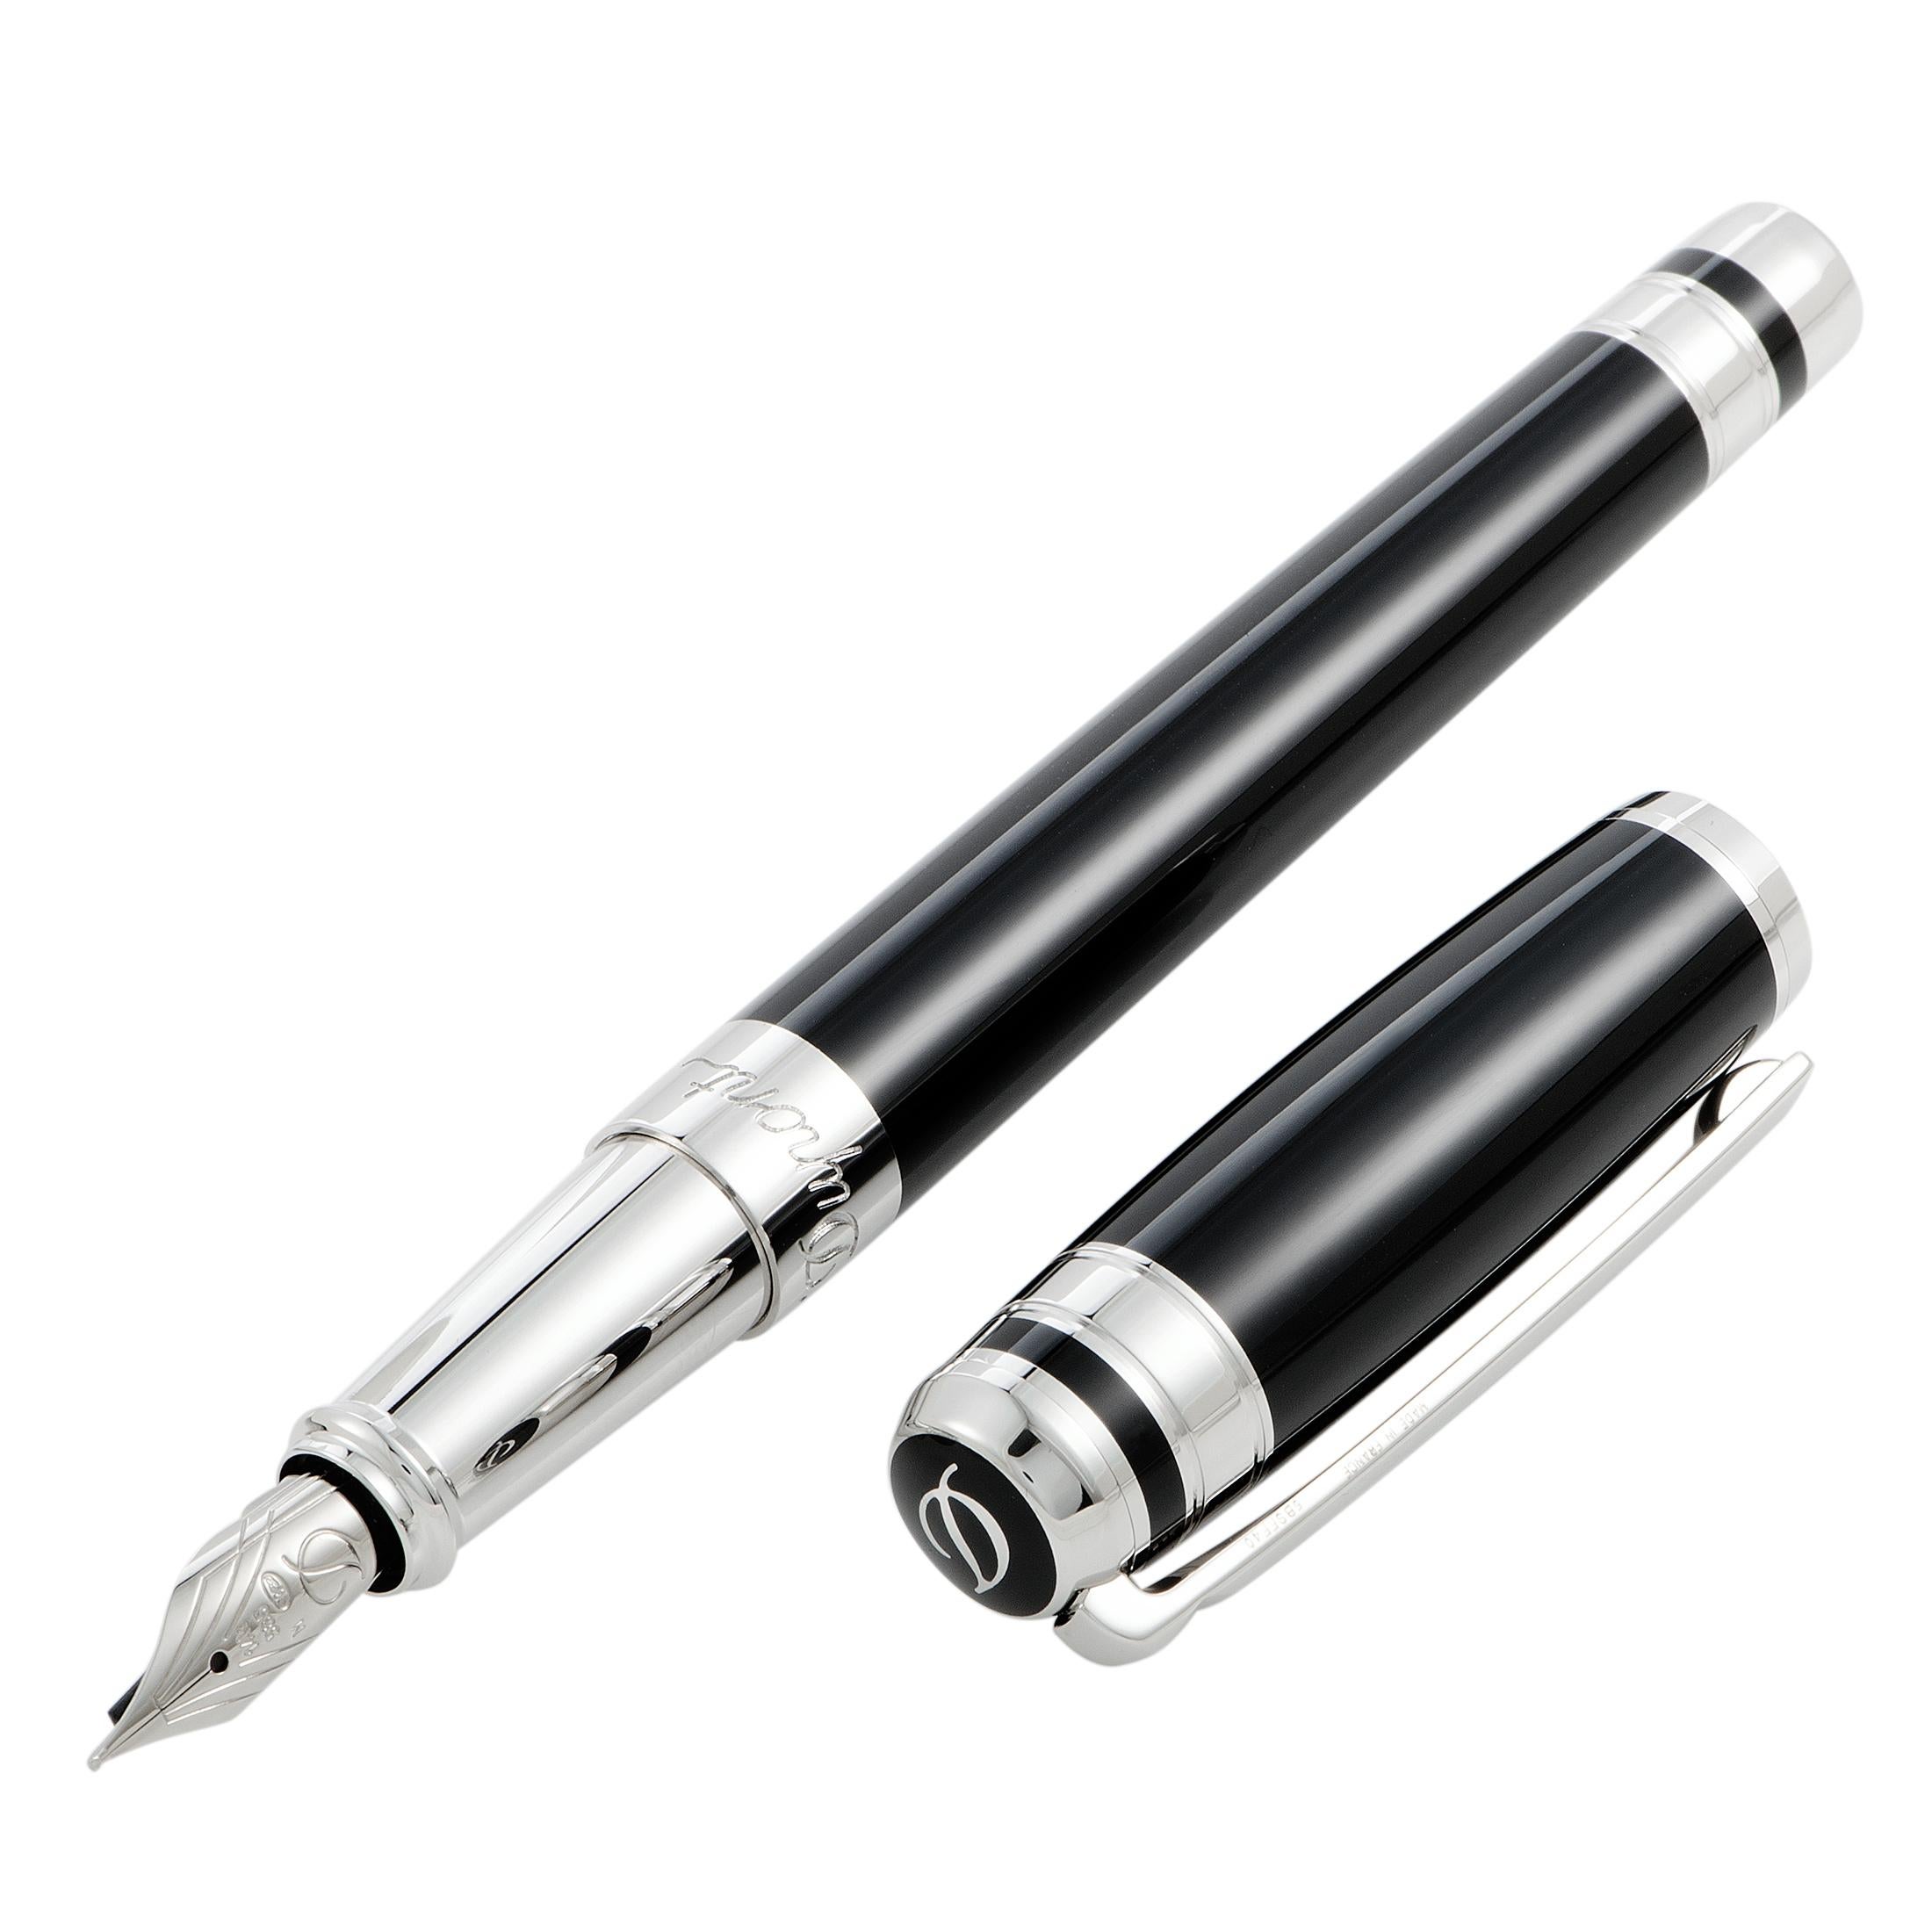 Embrace a sense of refined elegance with this classic fountain pen that offers an incredibly stylish appearance in an exceptionally tasteful color combination. The pen is designed by S.T. Dupont for the sublime “Line D” collection.